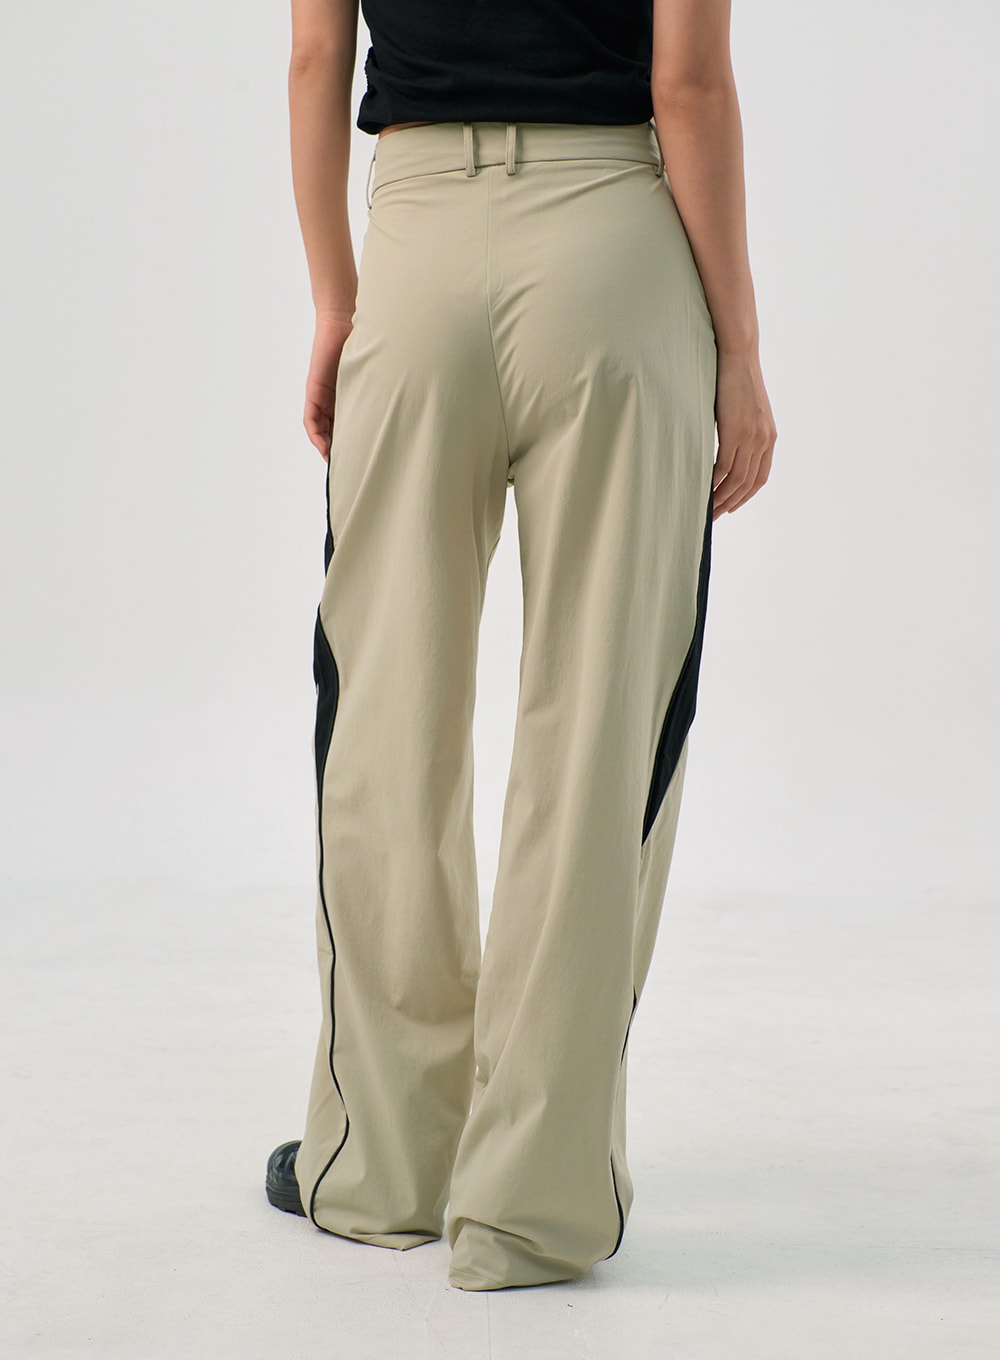 Two Color Drawstring Pants CY326